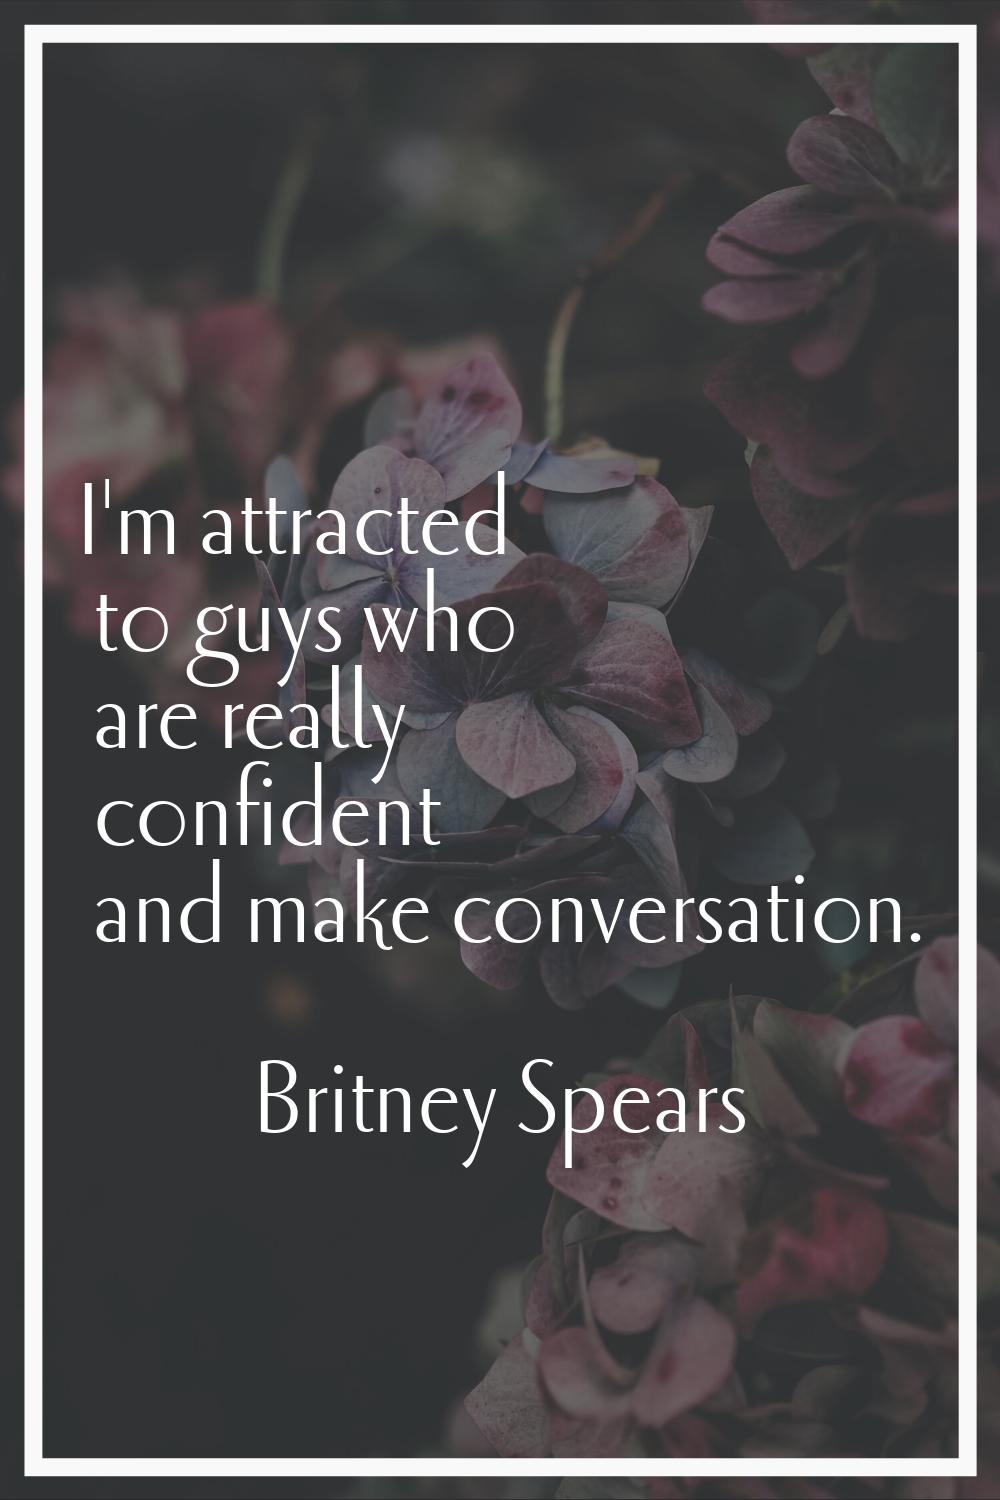 I'm attracted to guys who are really confident and make conversation.